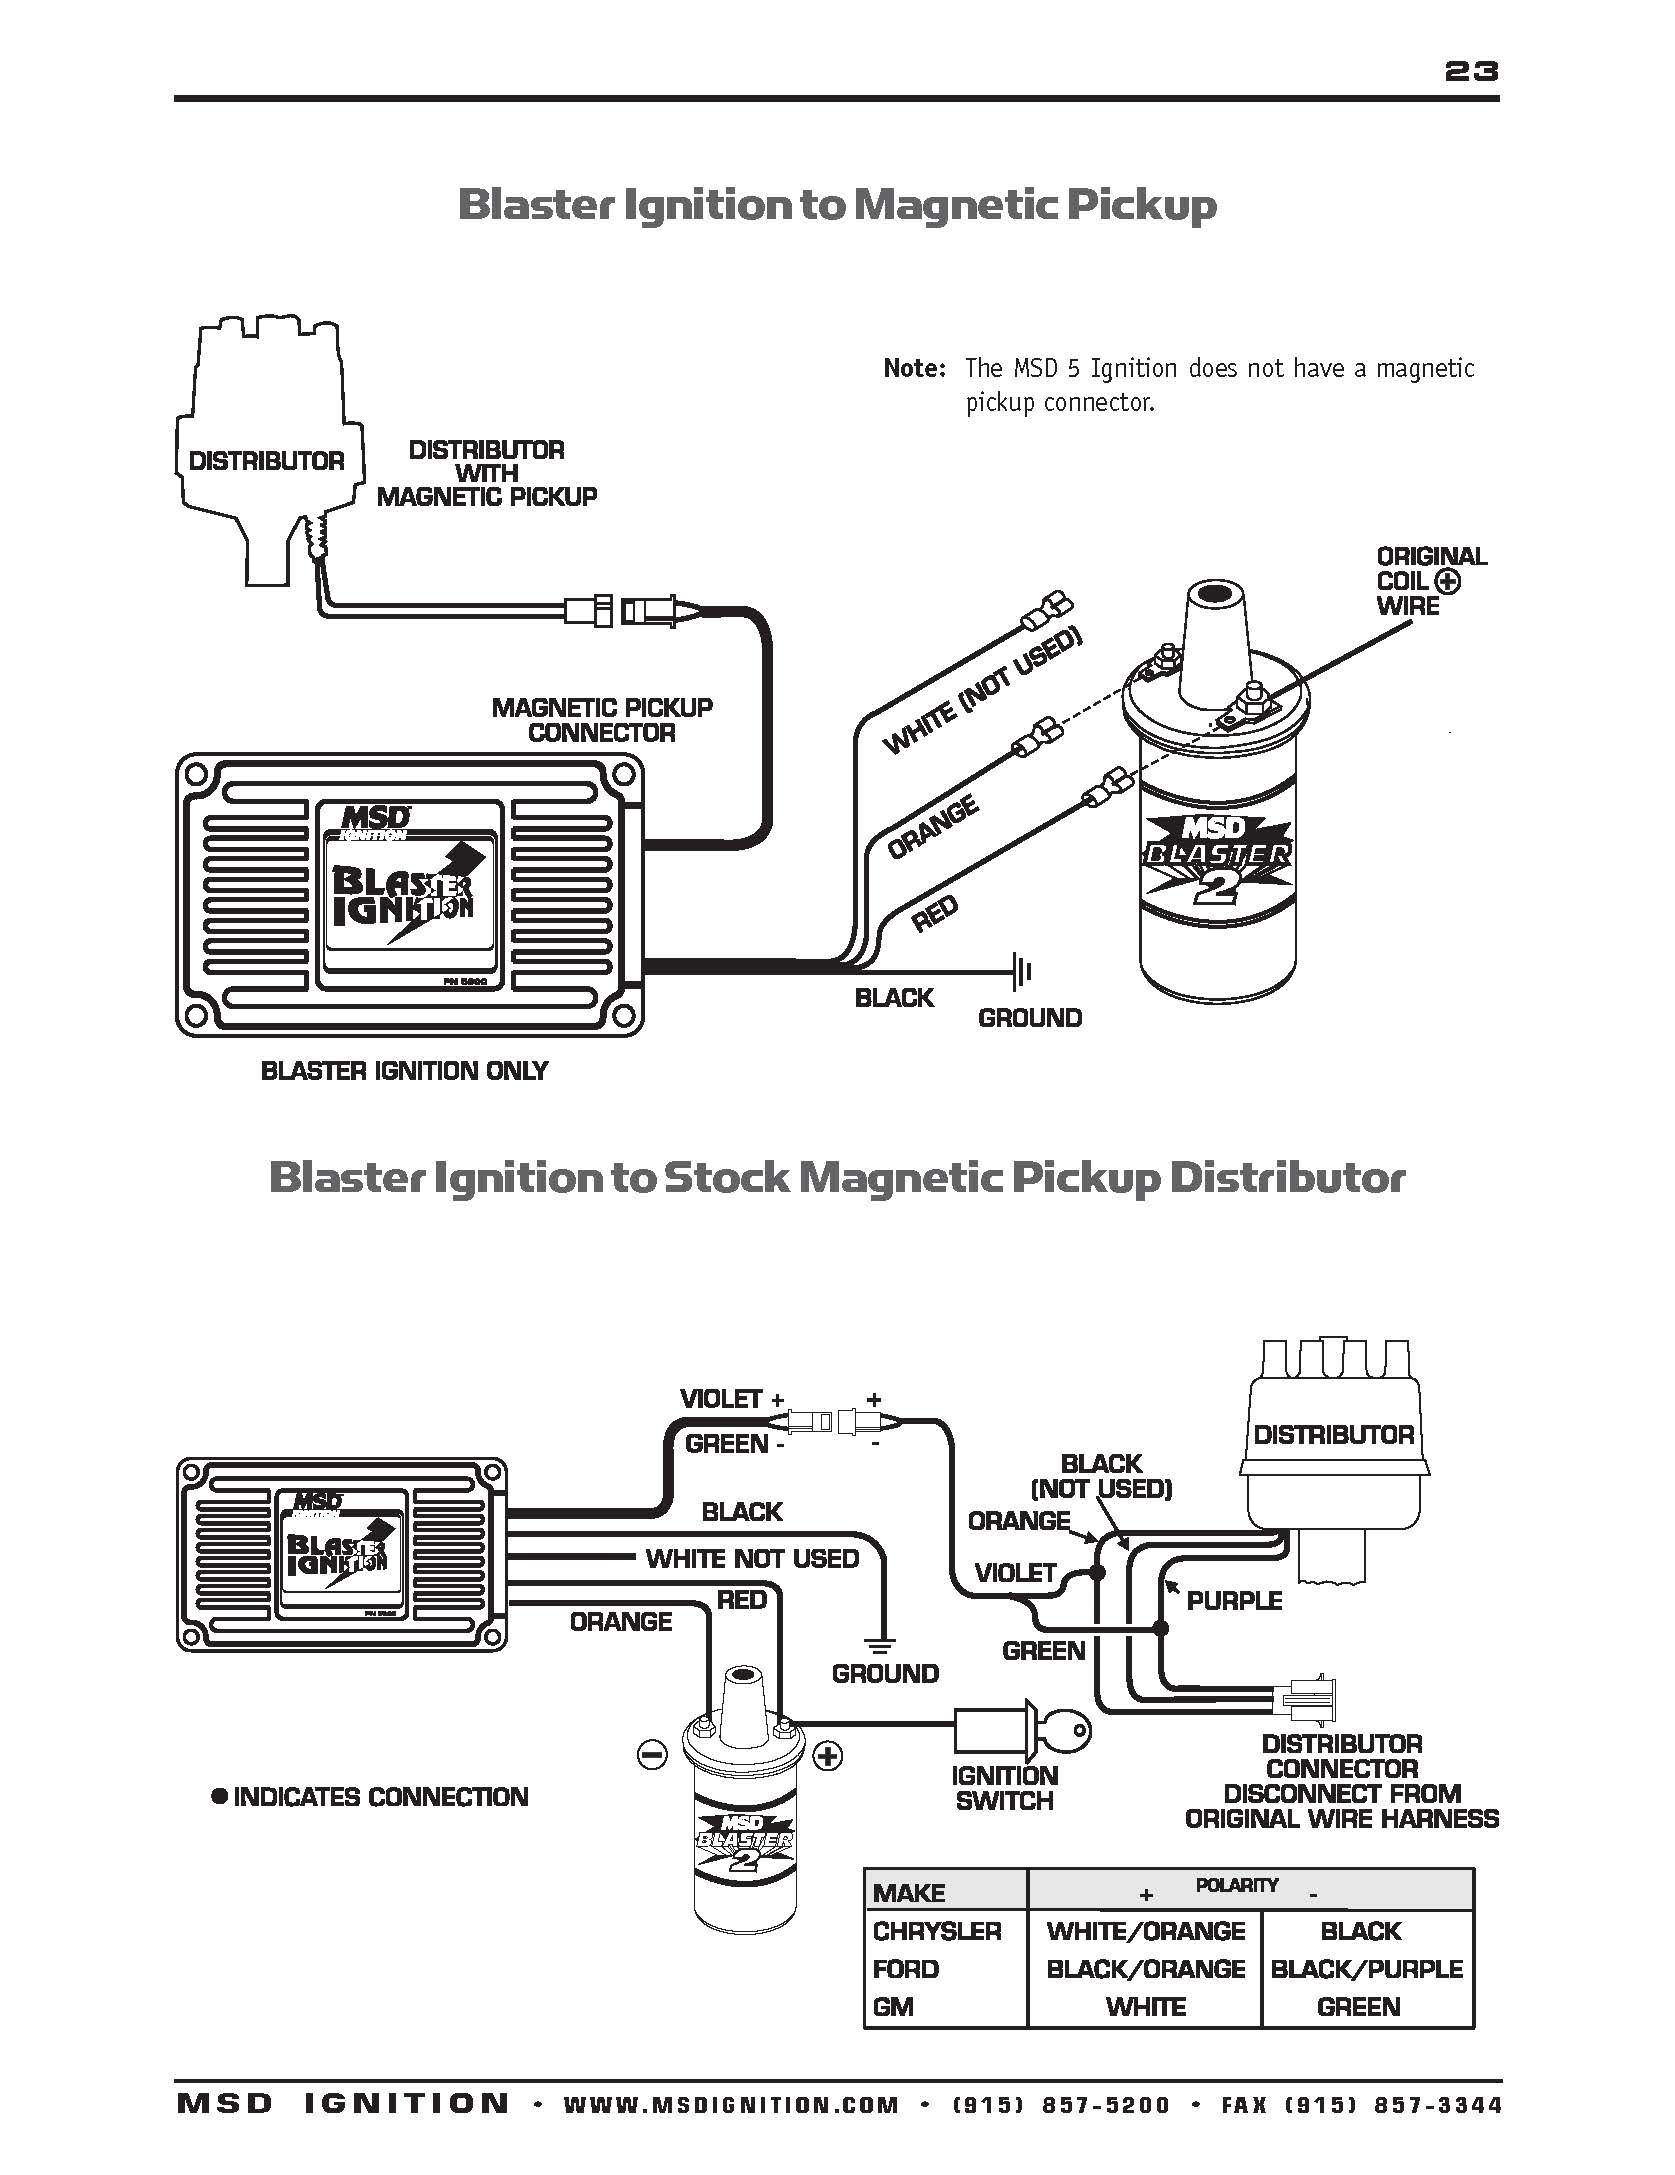 Msd Ignition Wiring Diagram - Wiring Diagrams Hubs - Msd Ignition Wiring Diagram Chevy